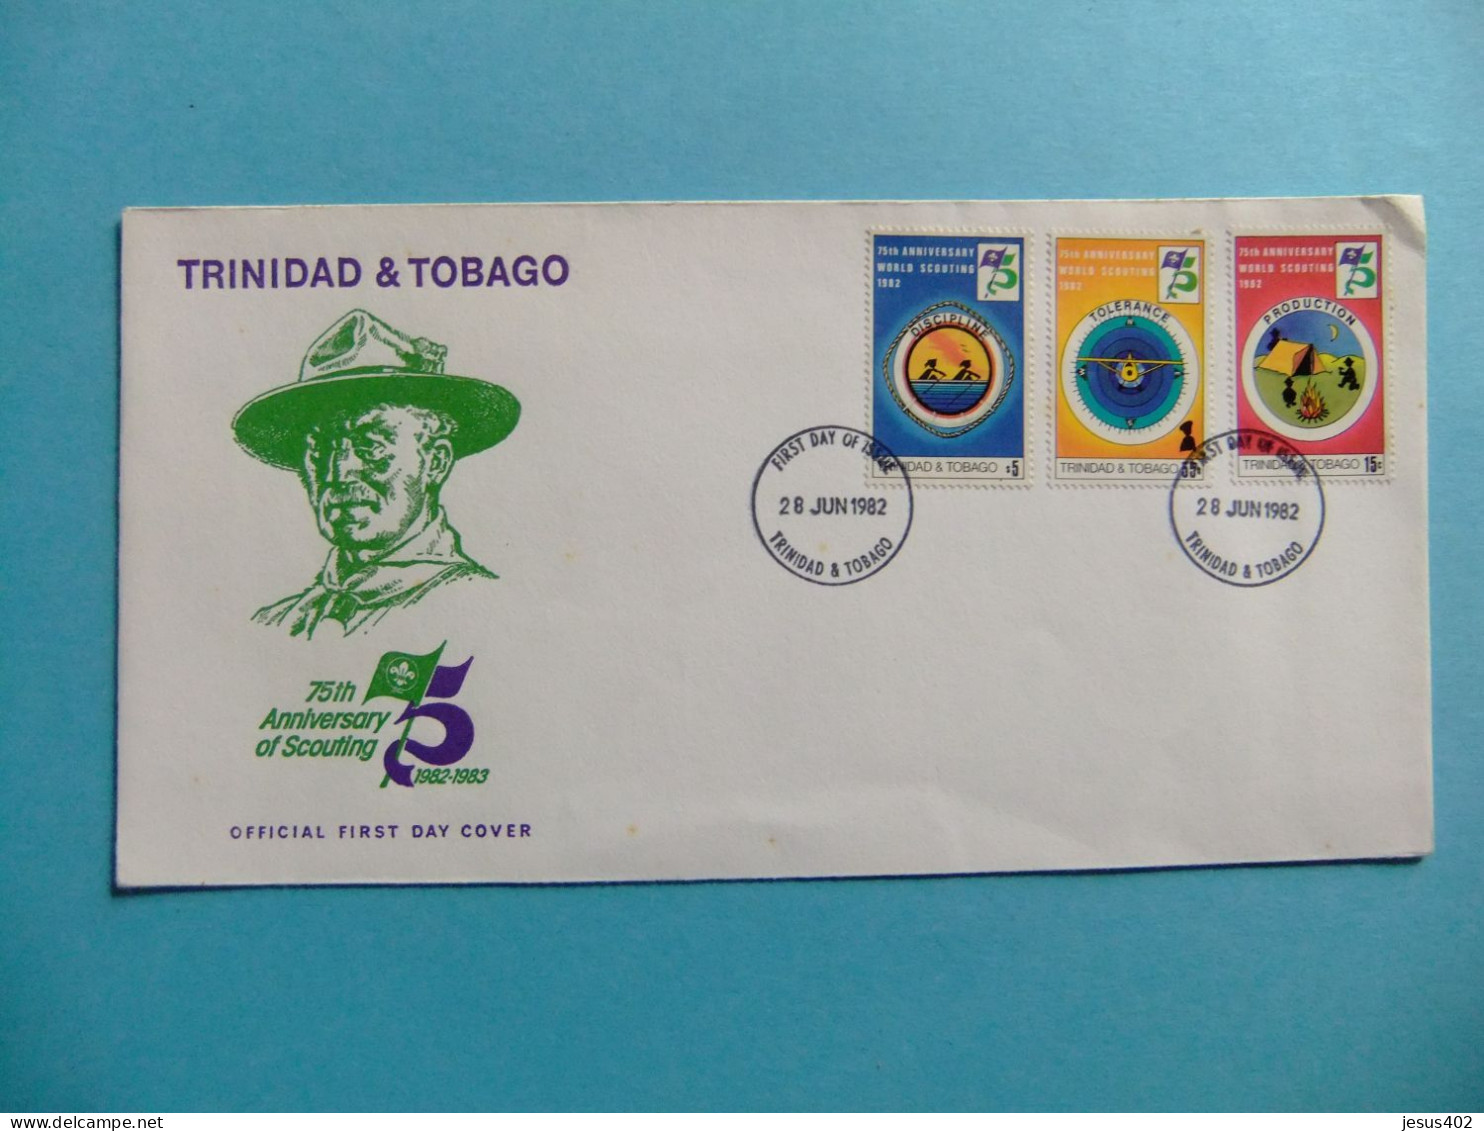 S3 FDC TRINIDAD & TOBAGO 1982 FIRST DAY OF ISSUE / 75 ANNIVERSARY Of SCOUTING / YVERT 452 / 454 - Covers & Documents